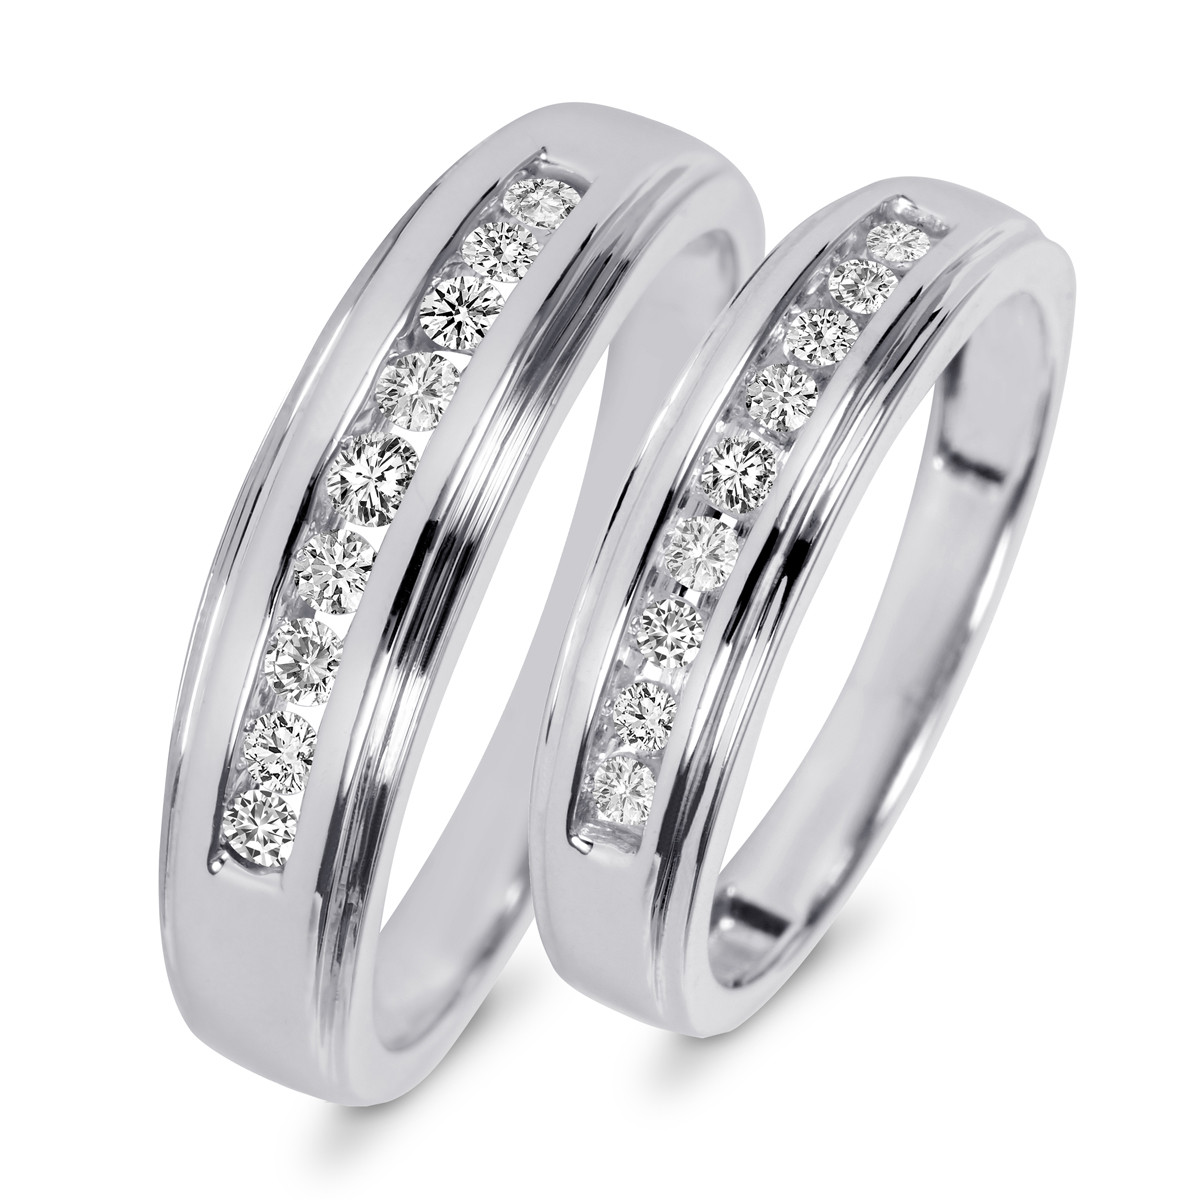 His And Hers Wedding Rings White Gold
 3 8 Carat T W Diamond His And Hers Wedding Band Set 10K